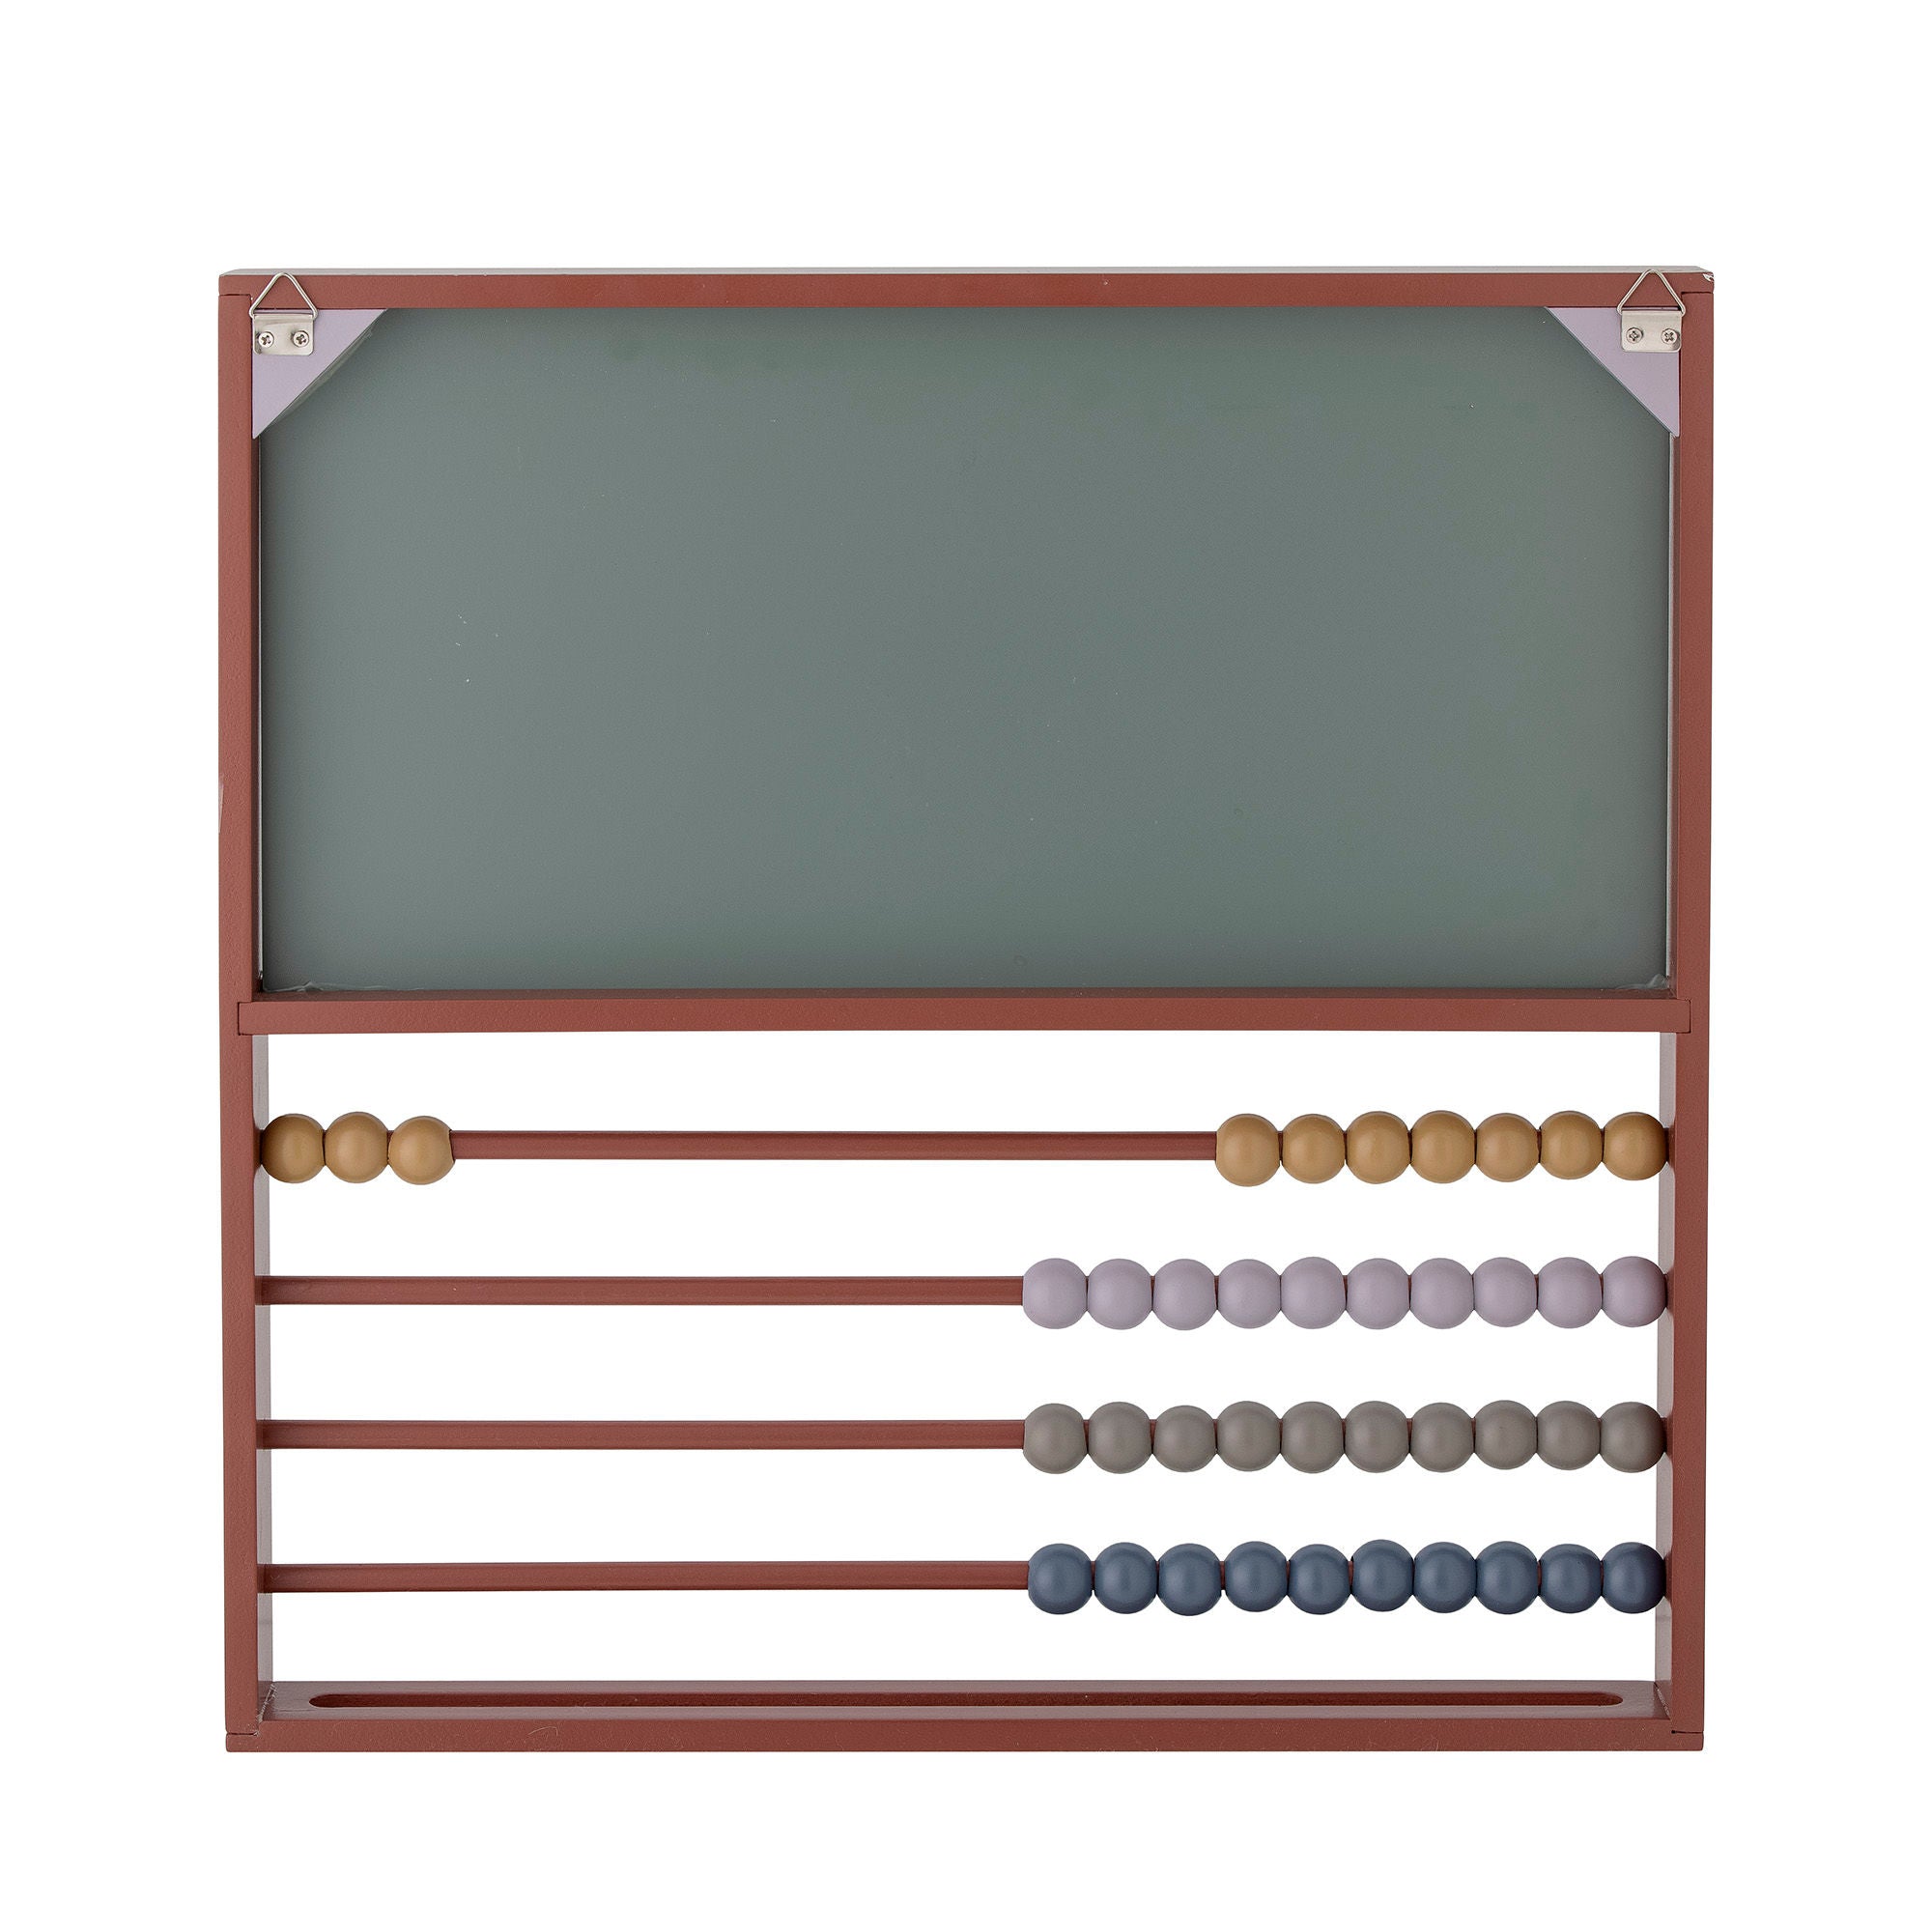 Bloomingville MINI Marcello Abacus, Green, FSC®100% Plywood